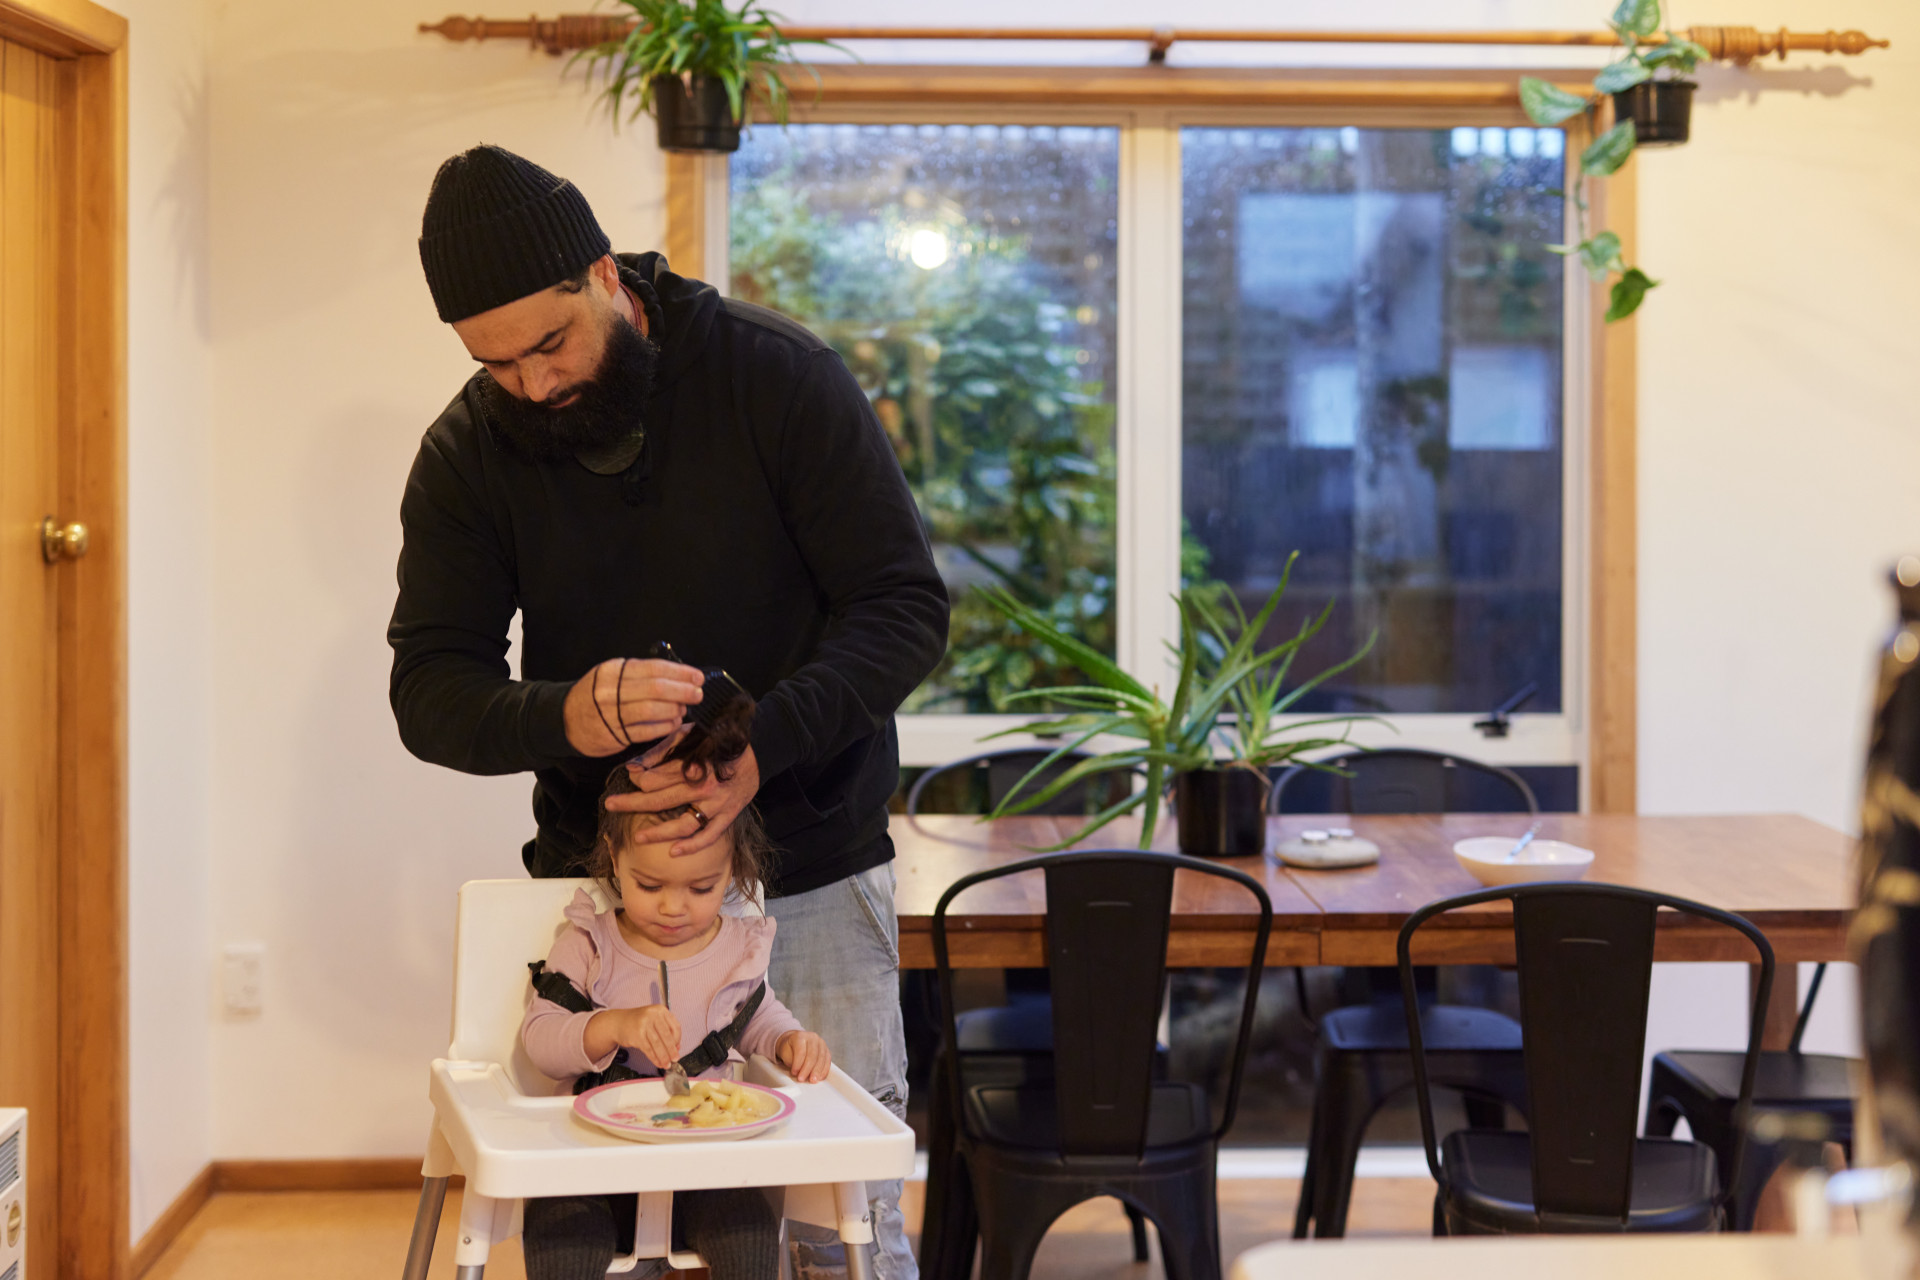 a man standing over a baby in a high chair